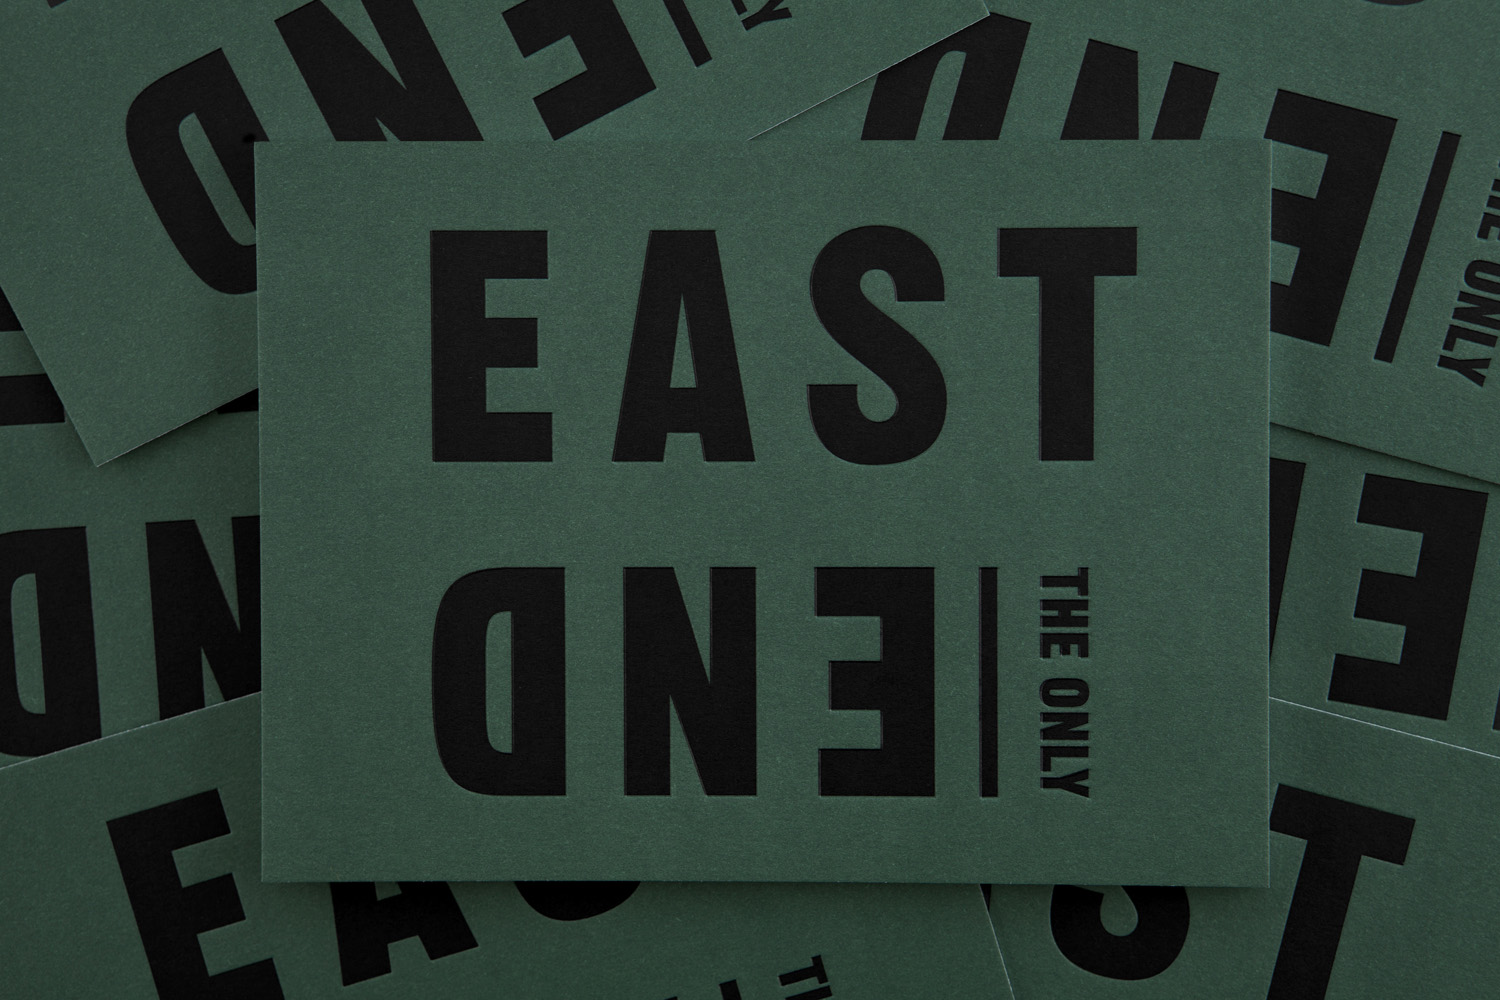 Visual identity designed by Blok for Toronto's The Broadview Hotel